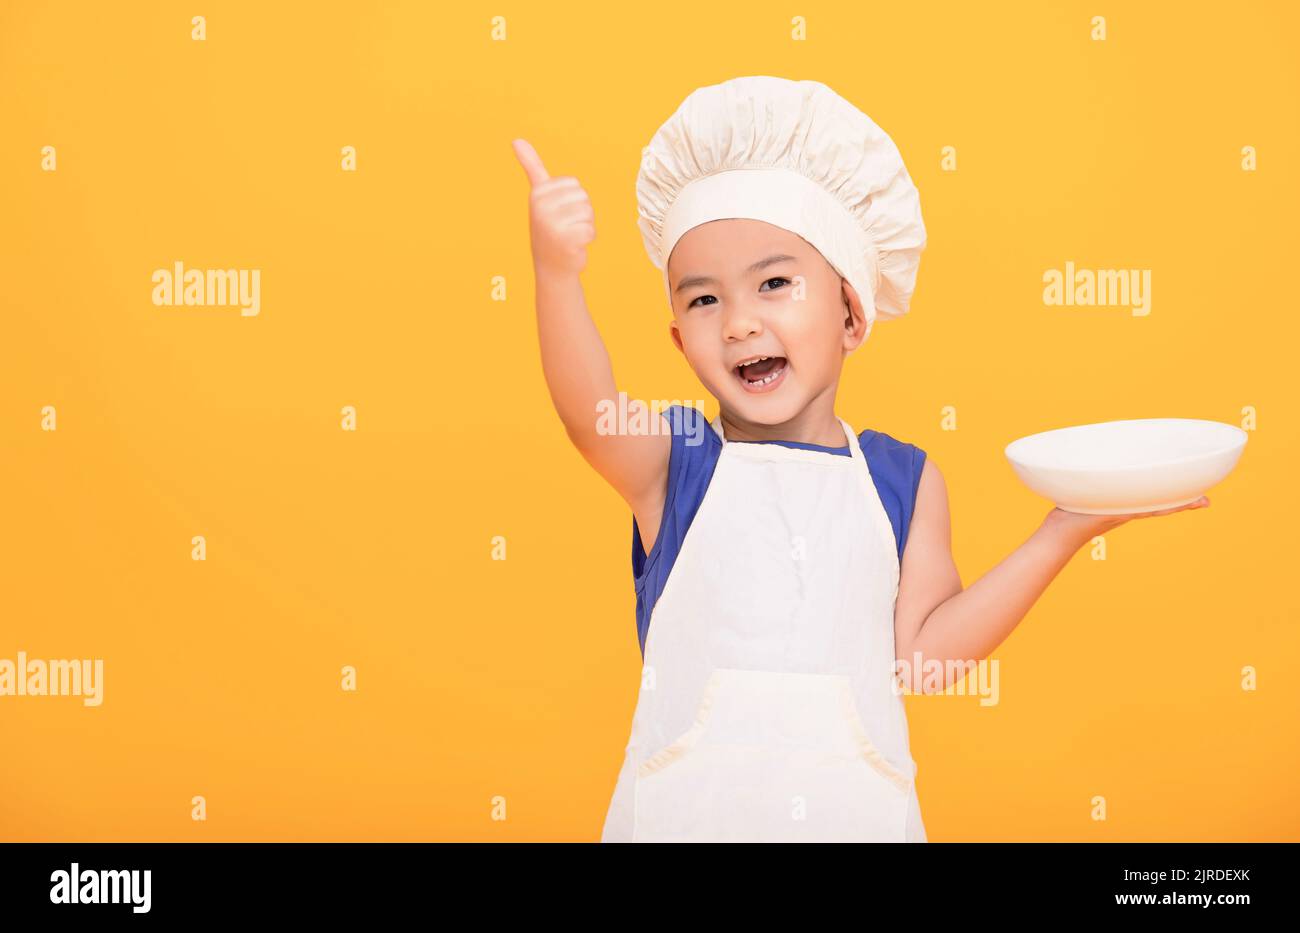 Happy boy in chef uniform showing thumbs up on yellow background Stock Photo